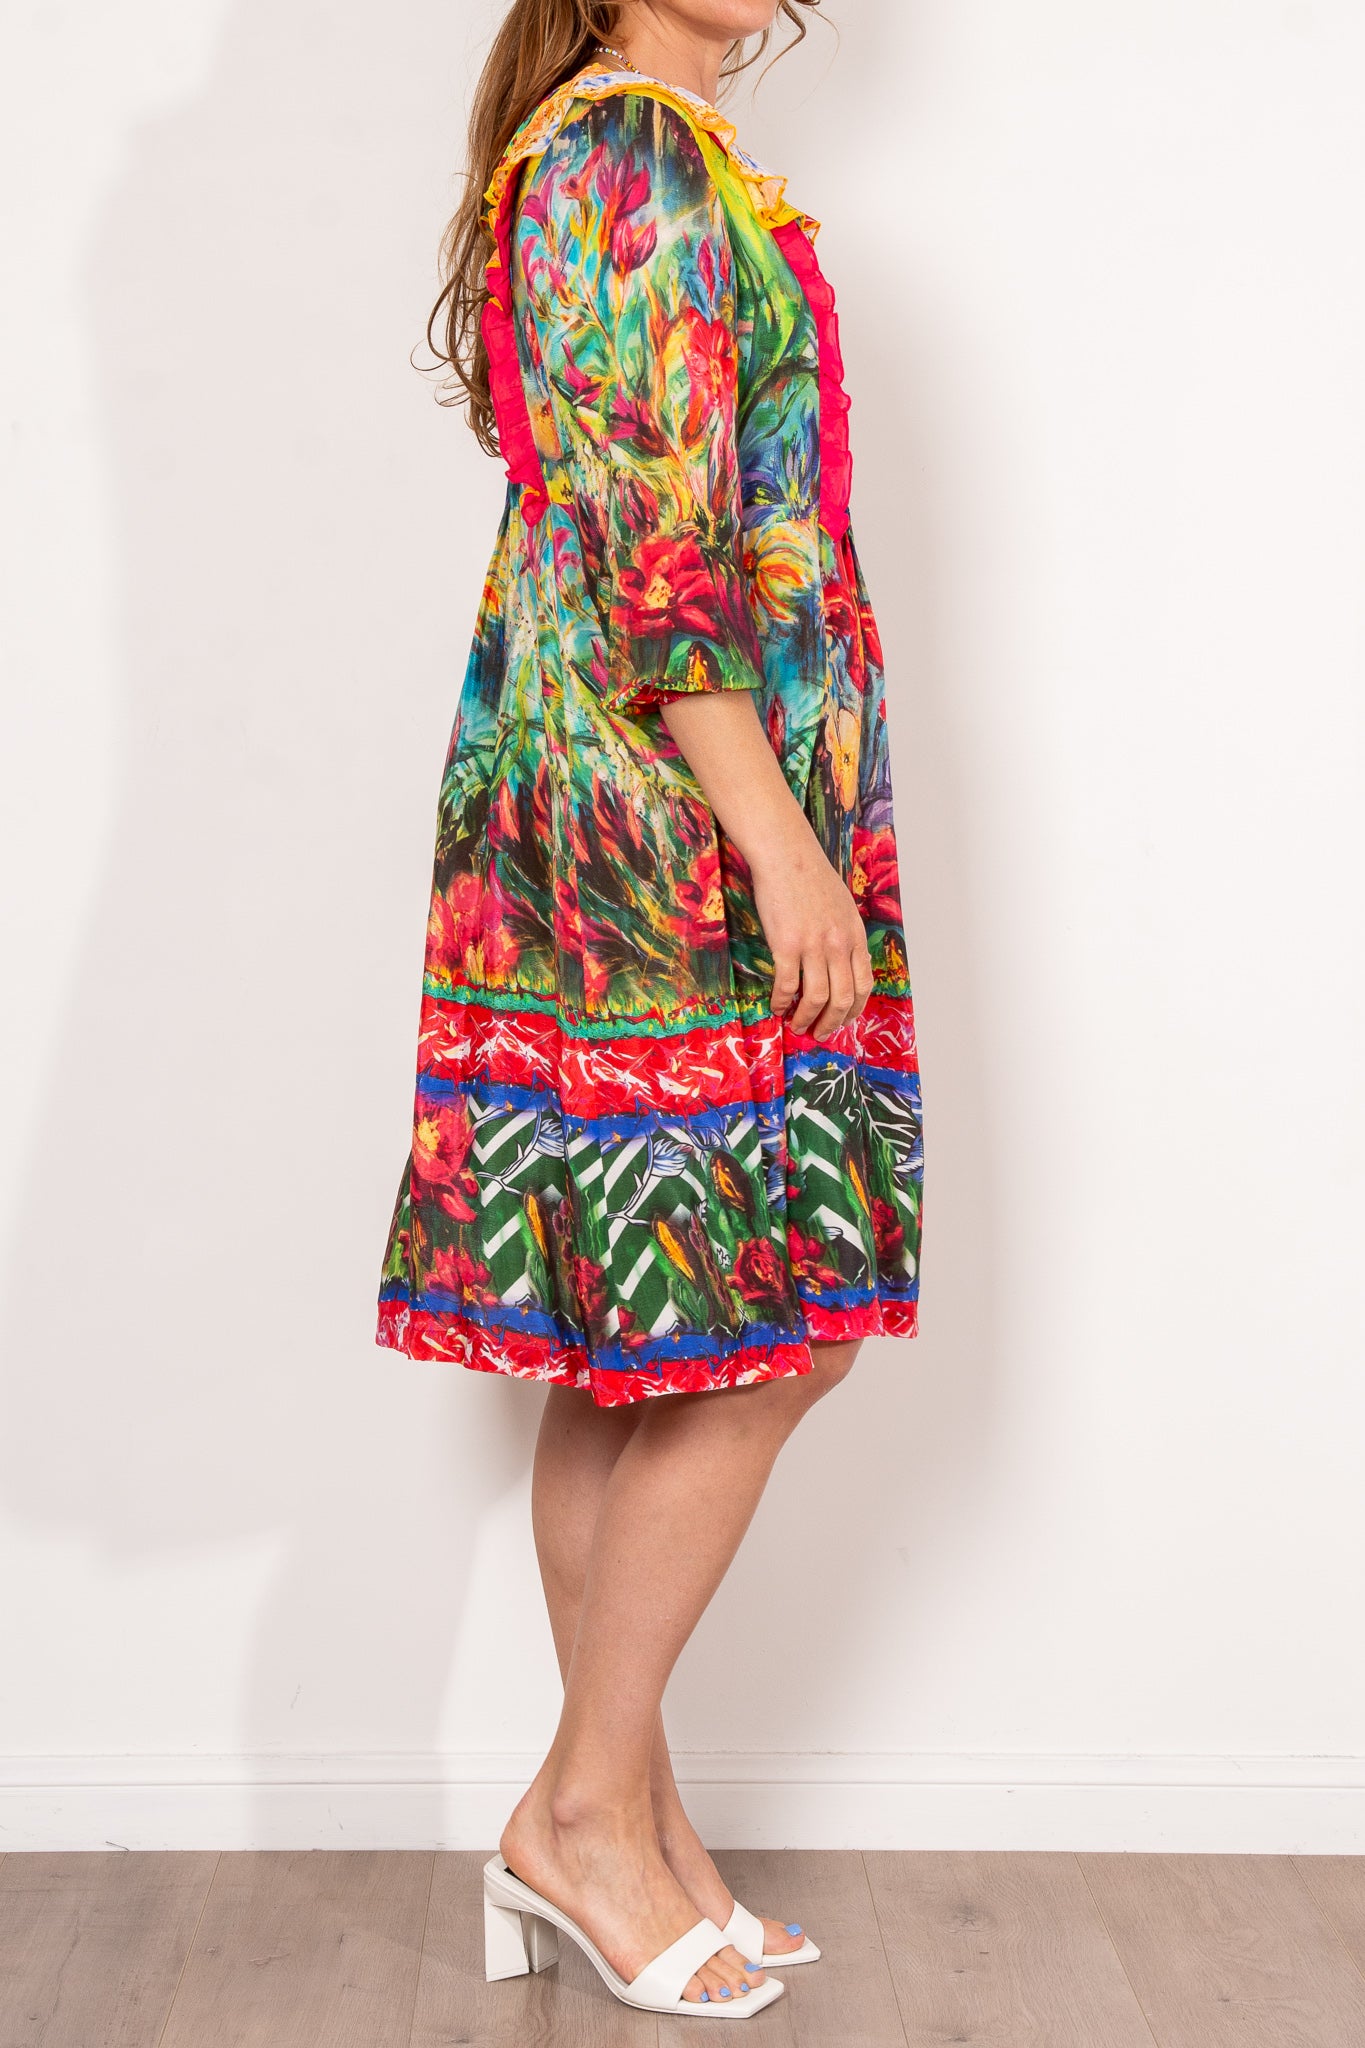 Curate by Trelise Cooper Shirty Dancing Dress